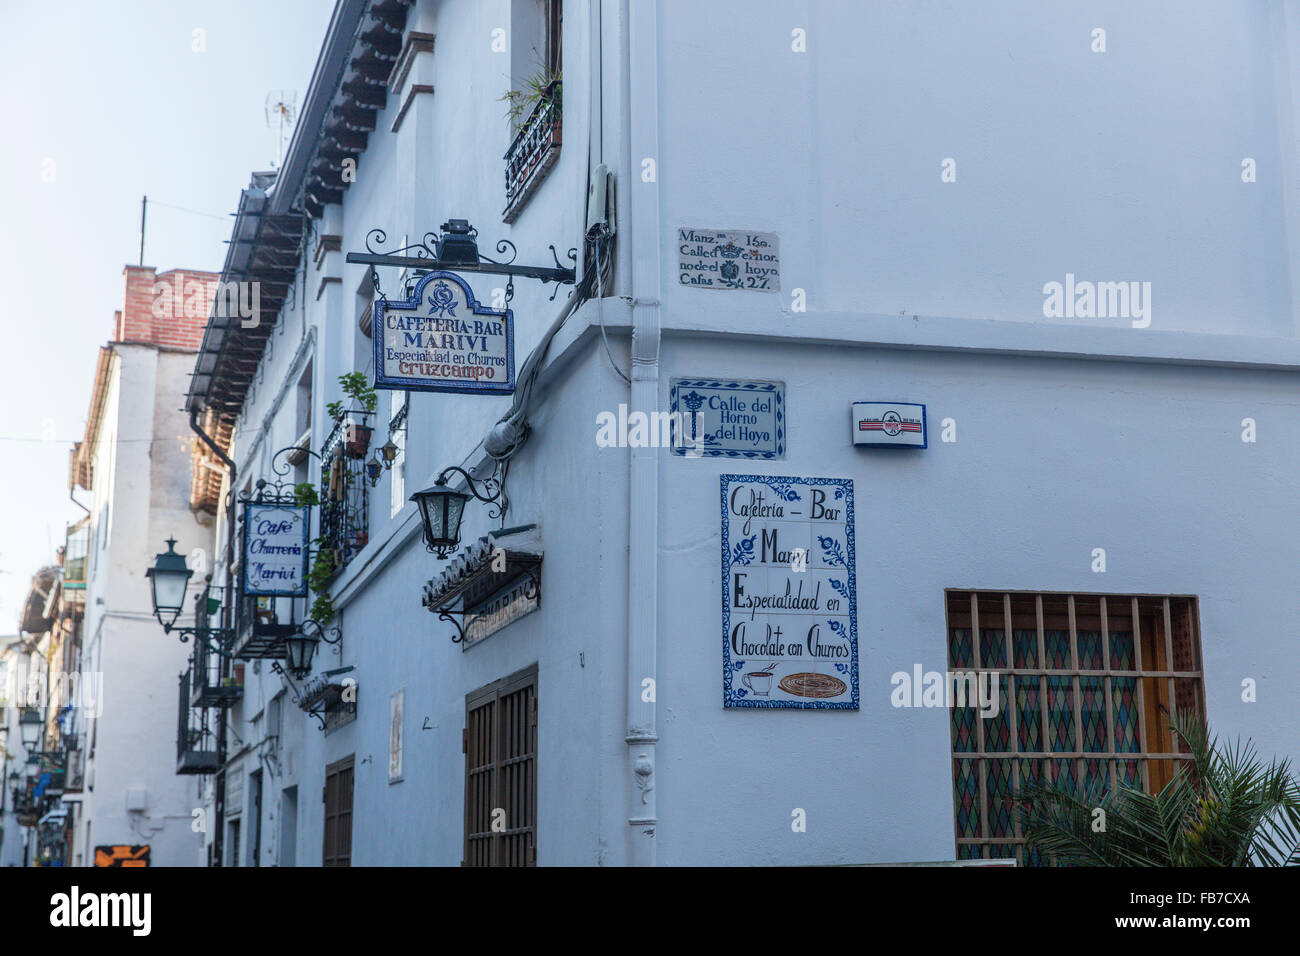 White walls of a restaurant and bar in the Albaicin district of Granada in Spain with ceramic tiles on the walls. Stock Photo